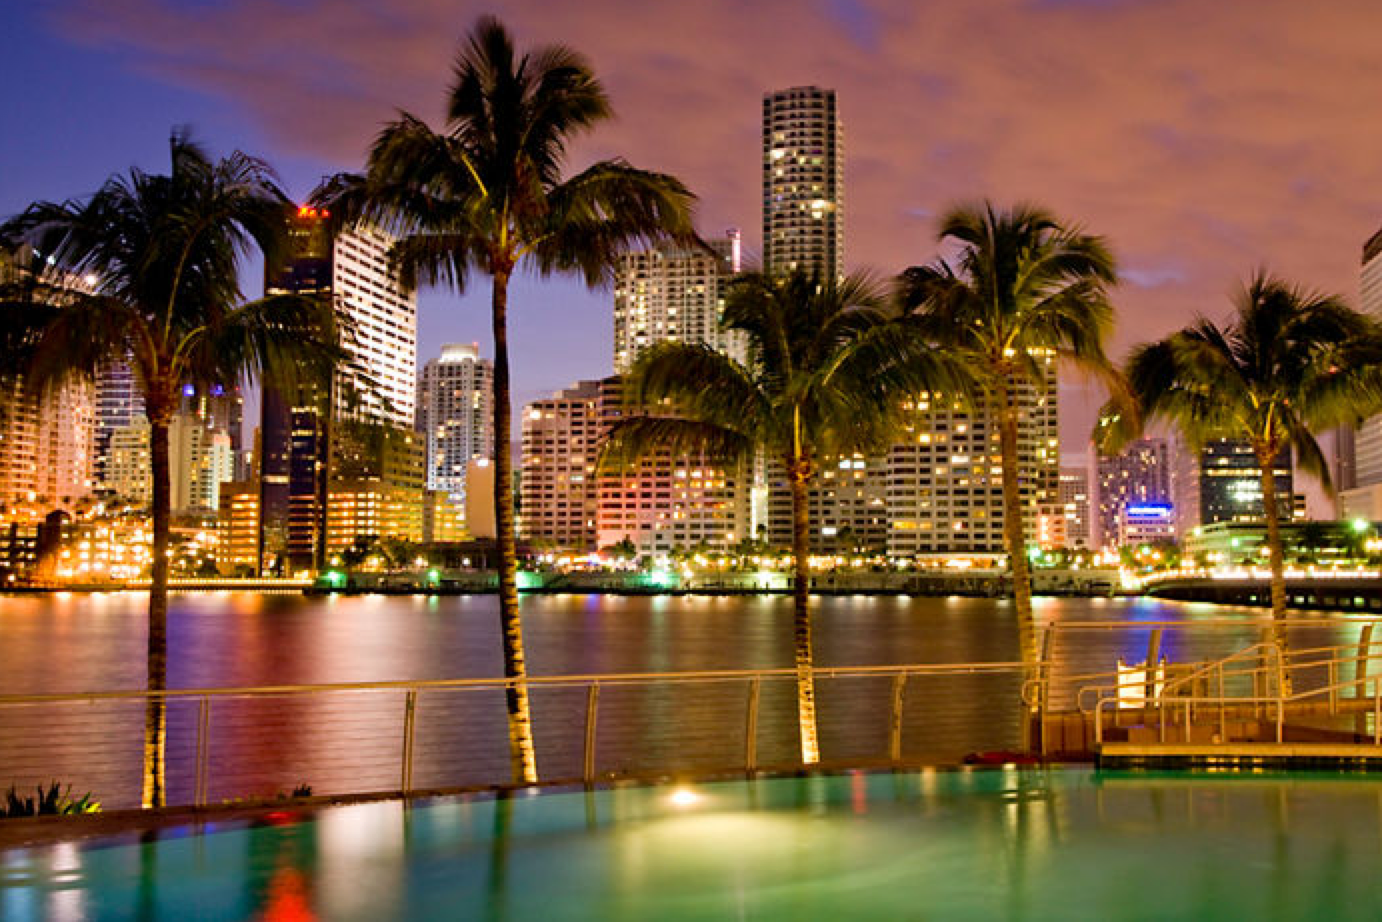 places to visit in miami